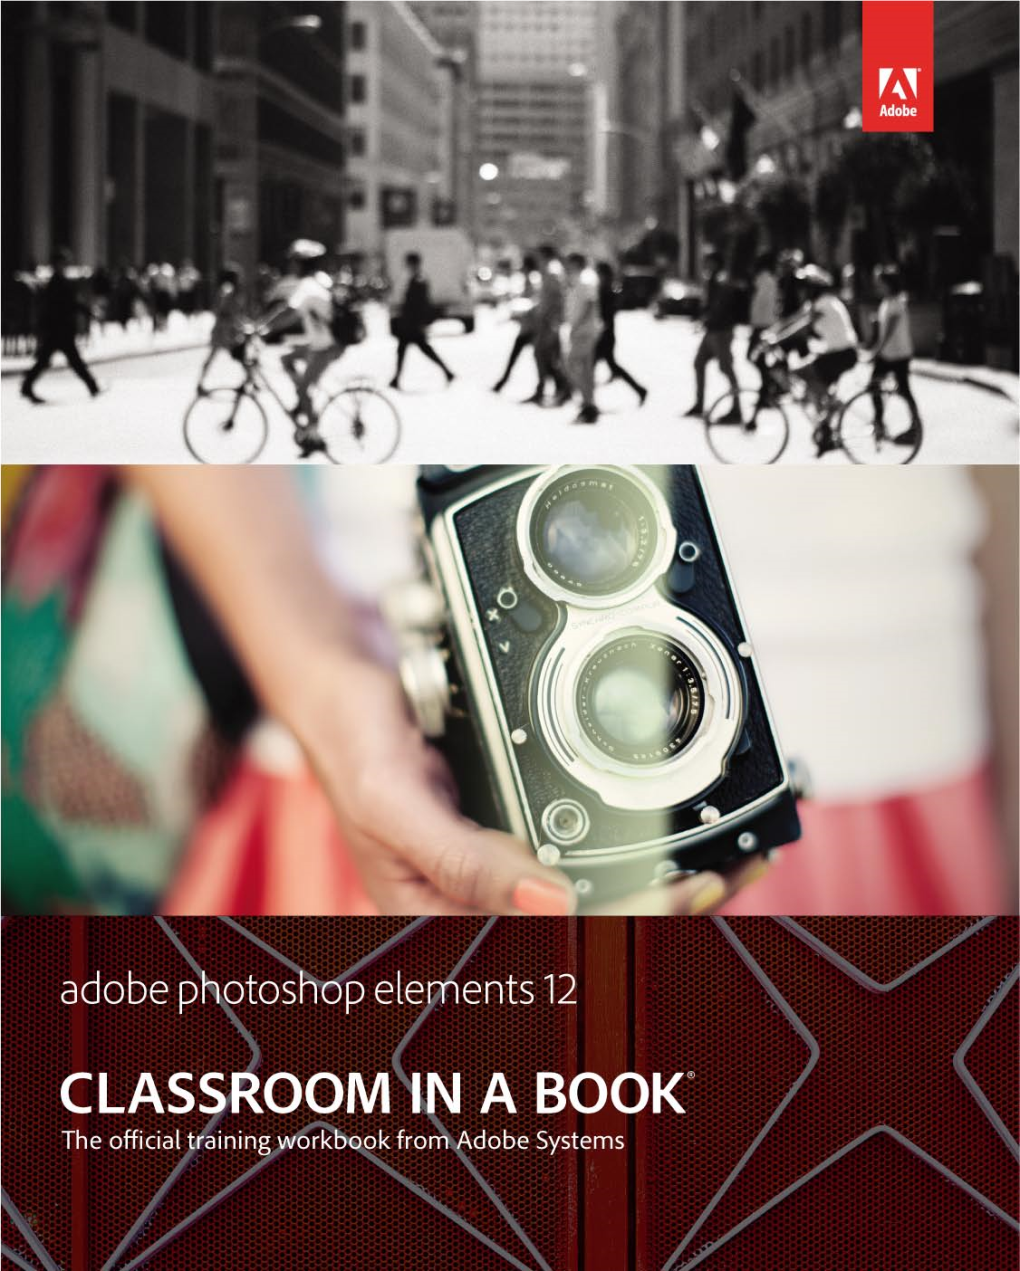 Adobe Photoshop Elements 12 Classroom in a Book®